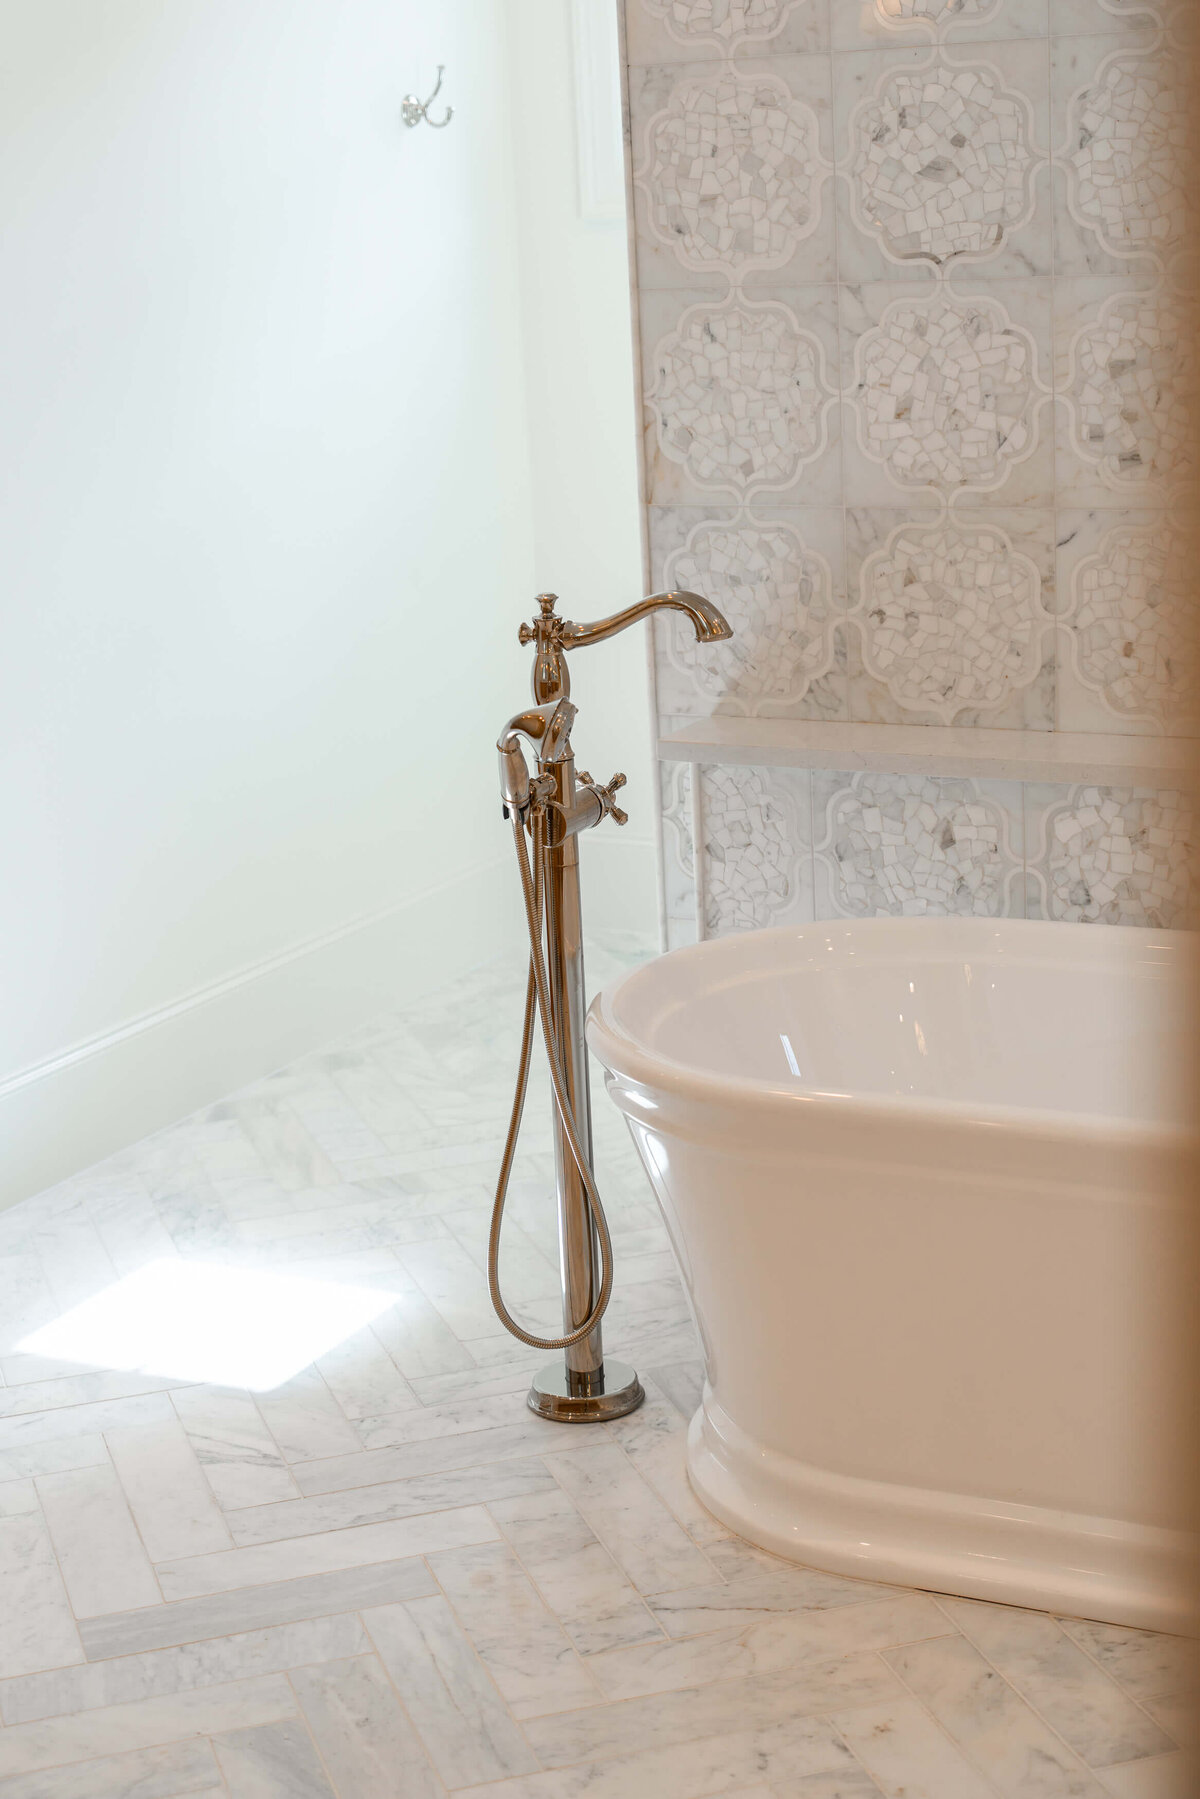 Primary bathroom details with freestanding tub